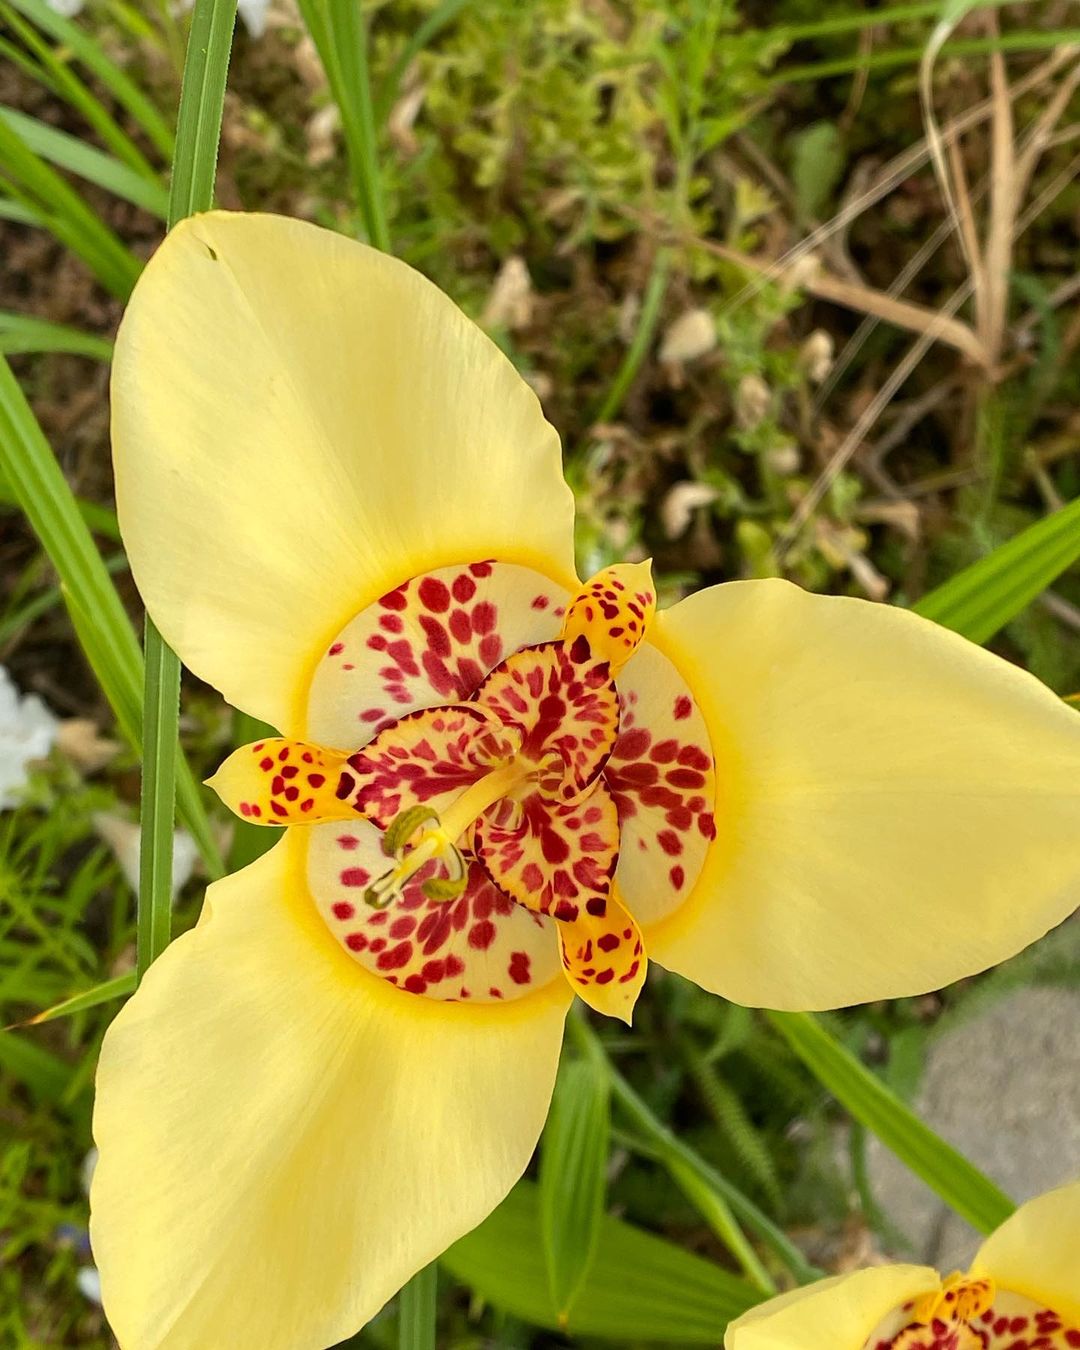 Yellow orchid with red spots on petals, known as Tigridia.